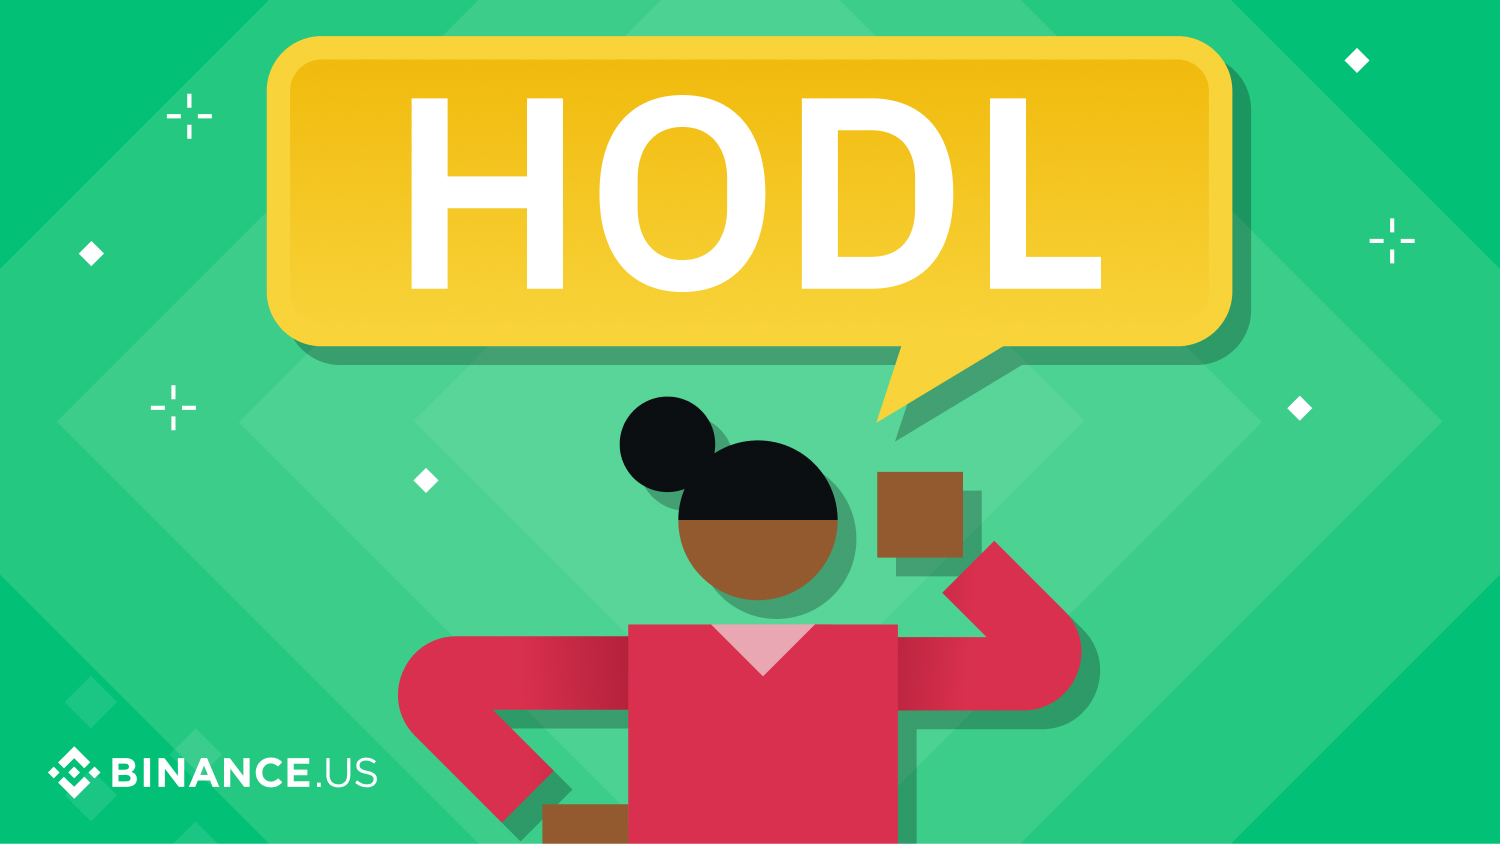 What Does HODL Mean?